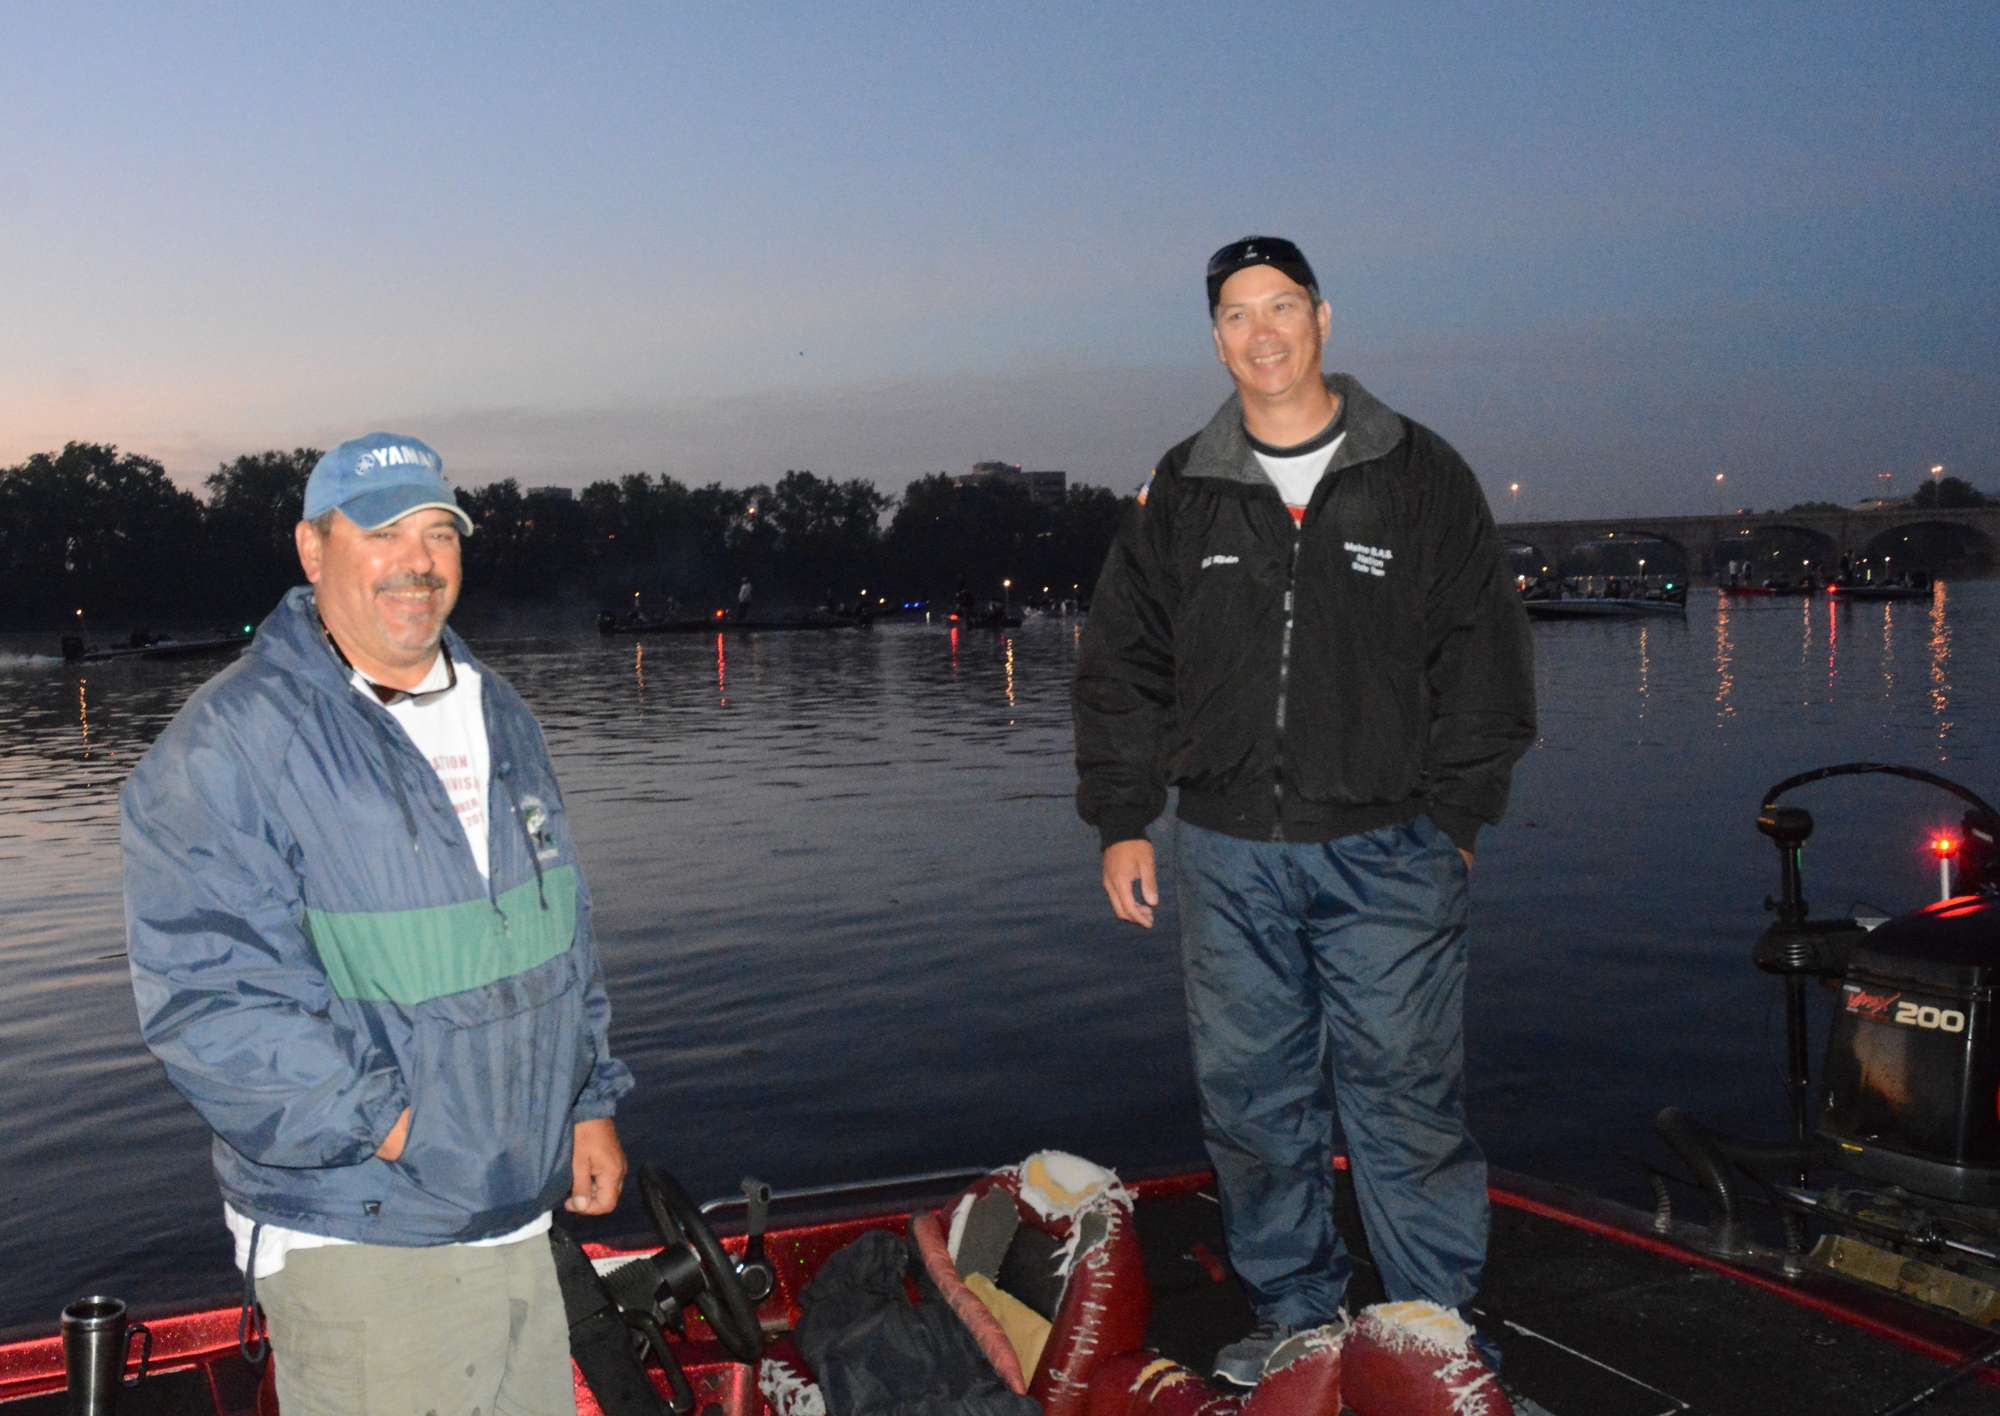 Paul LeBlanc of Massachusetts and Bill Rider of Maine will lead the takeoff in boat No. 1.